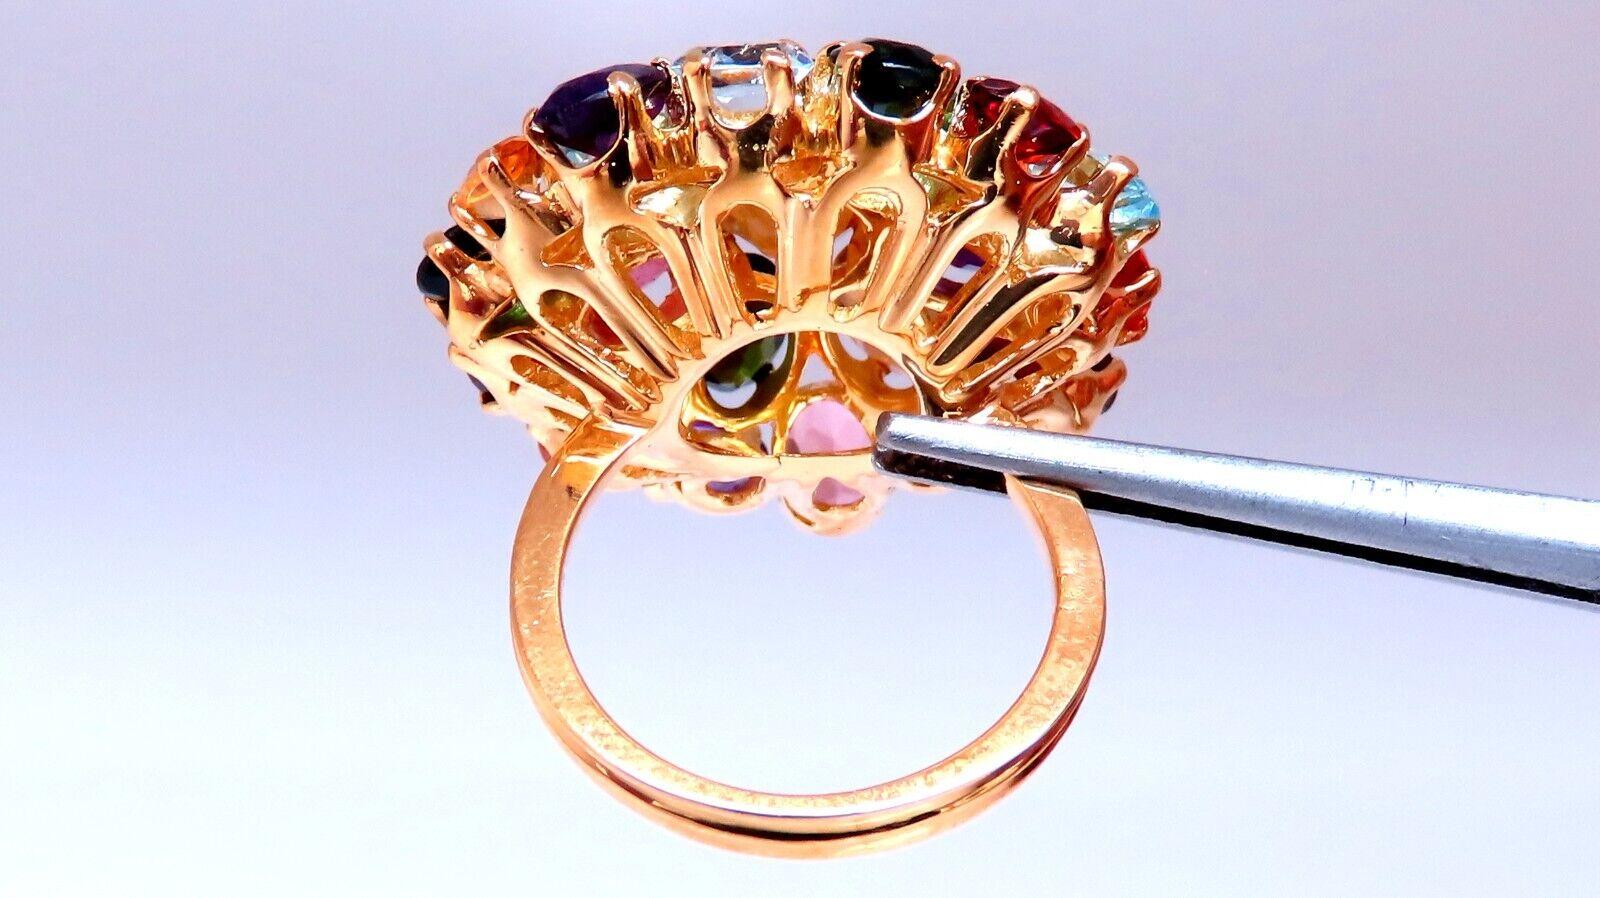 Cocktail ring.

Selection of various gem stones.

Citrine, Aquamarine, sapphire and amethysts

 14kt yellow  gold 12.9 grams

Depth of ring 11 mm

26mm wide ring

Size 6 and with may resize